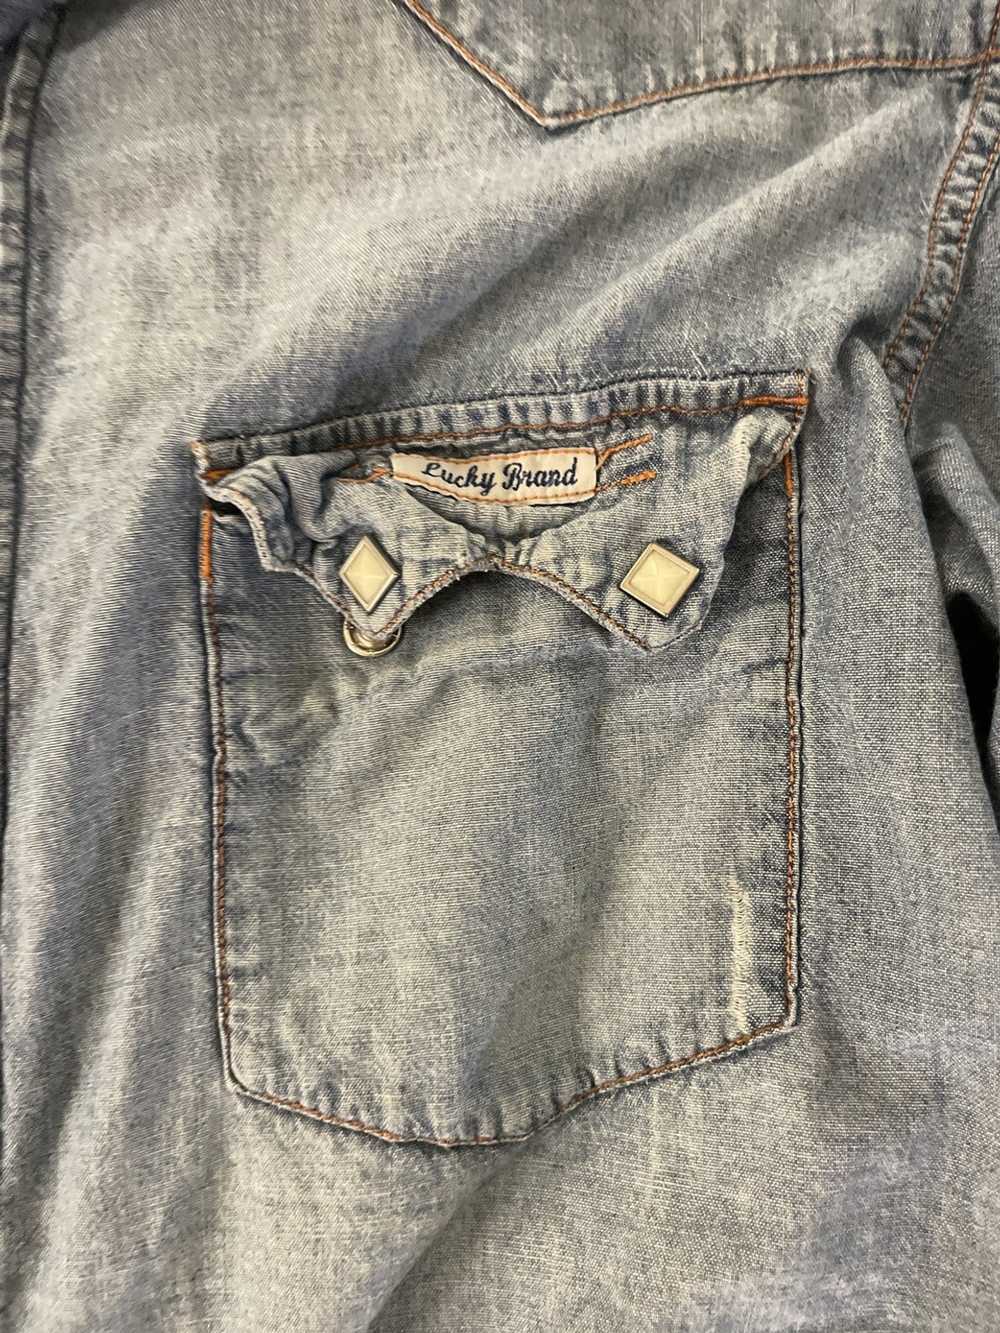 Lucky Brand Perfectly Love Worn and Distressed De… - image 3